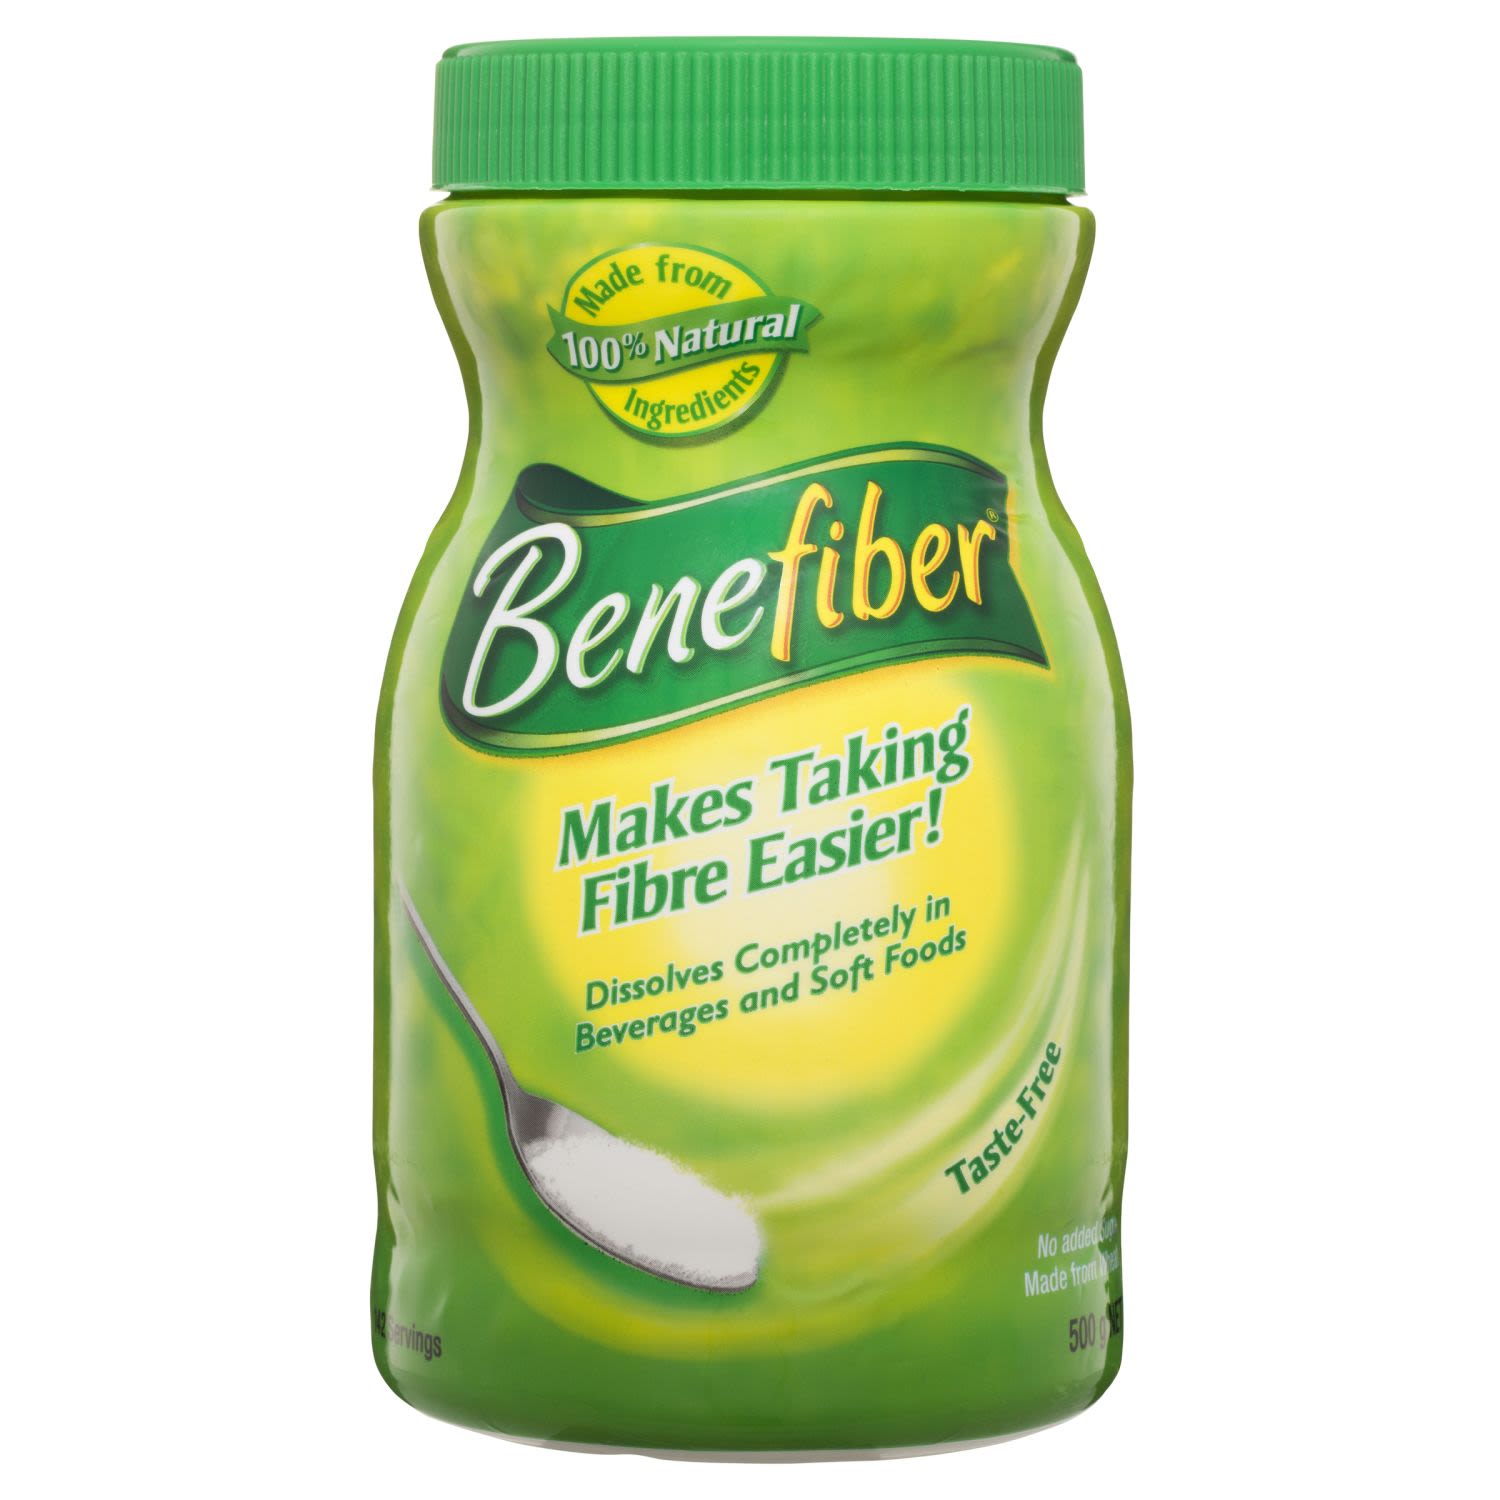 Exploring the Ingredients in Benefiber: How It Works and What It's Made Of